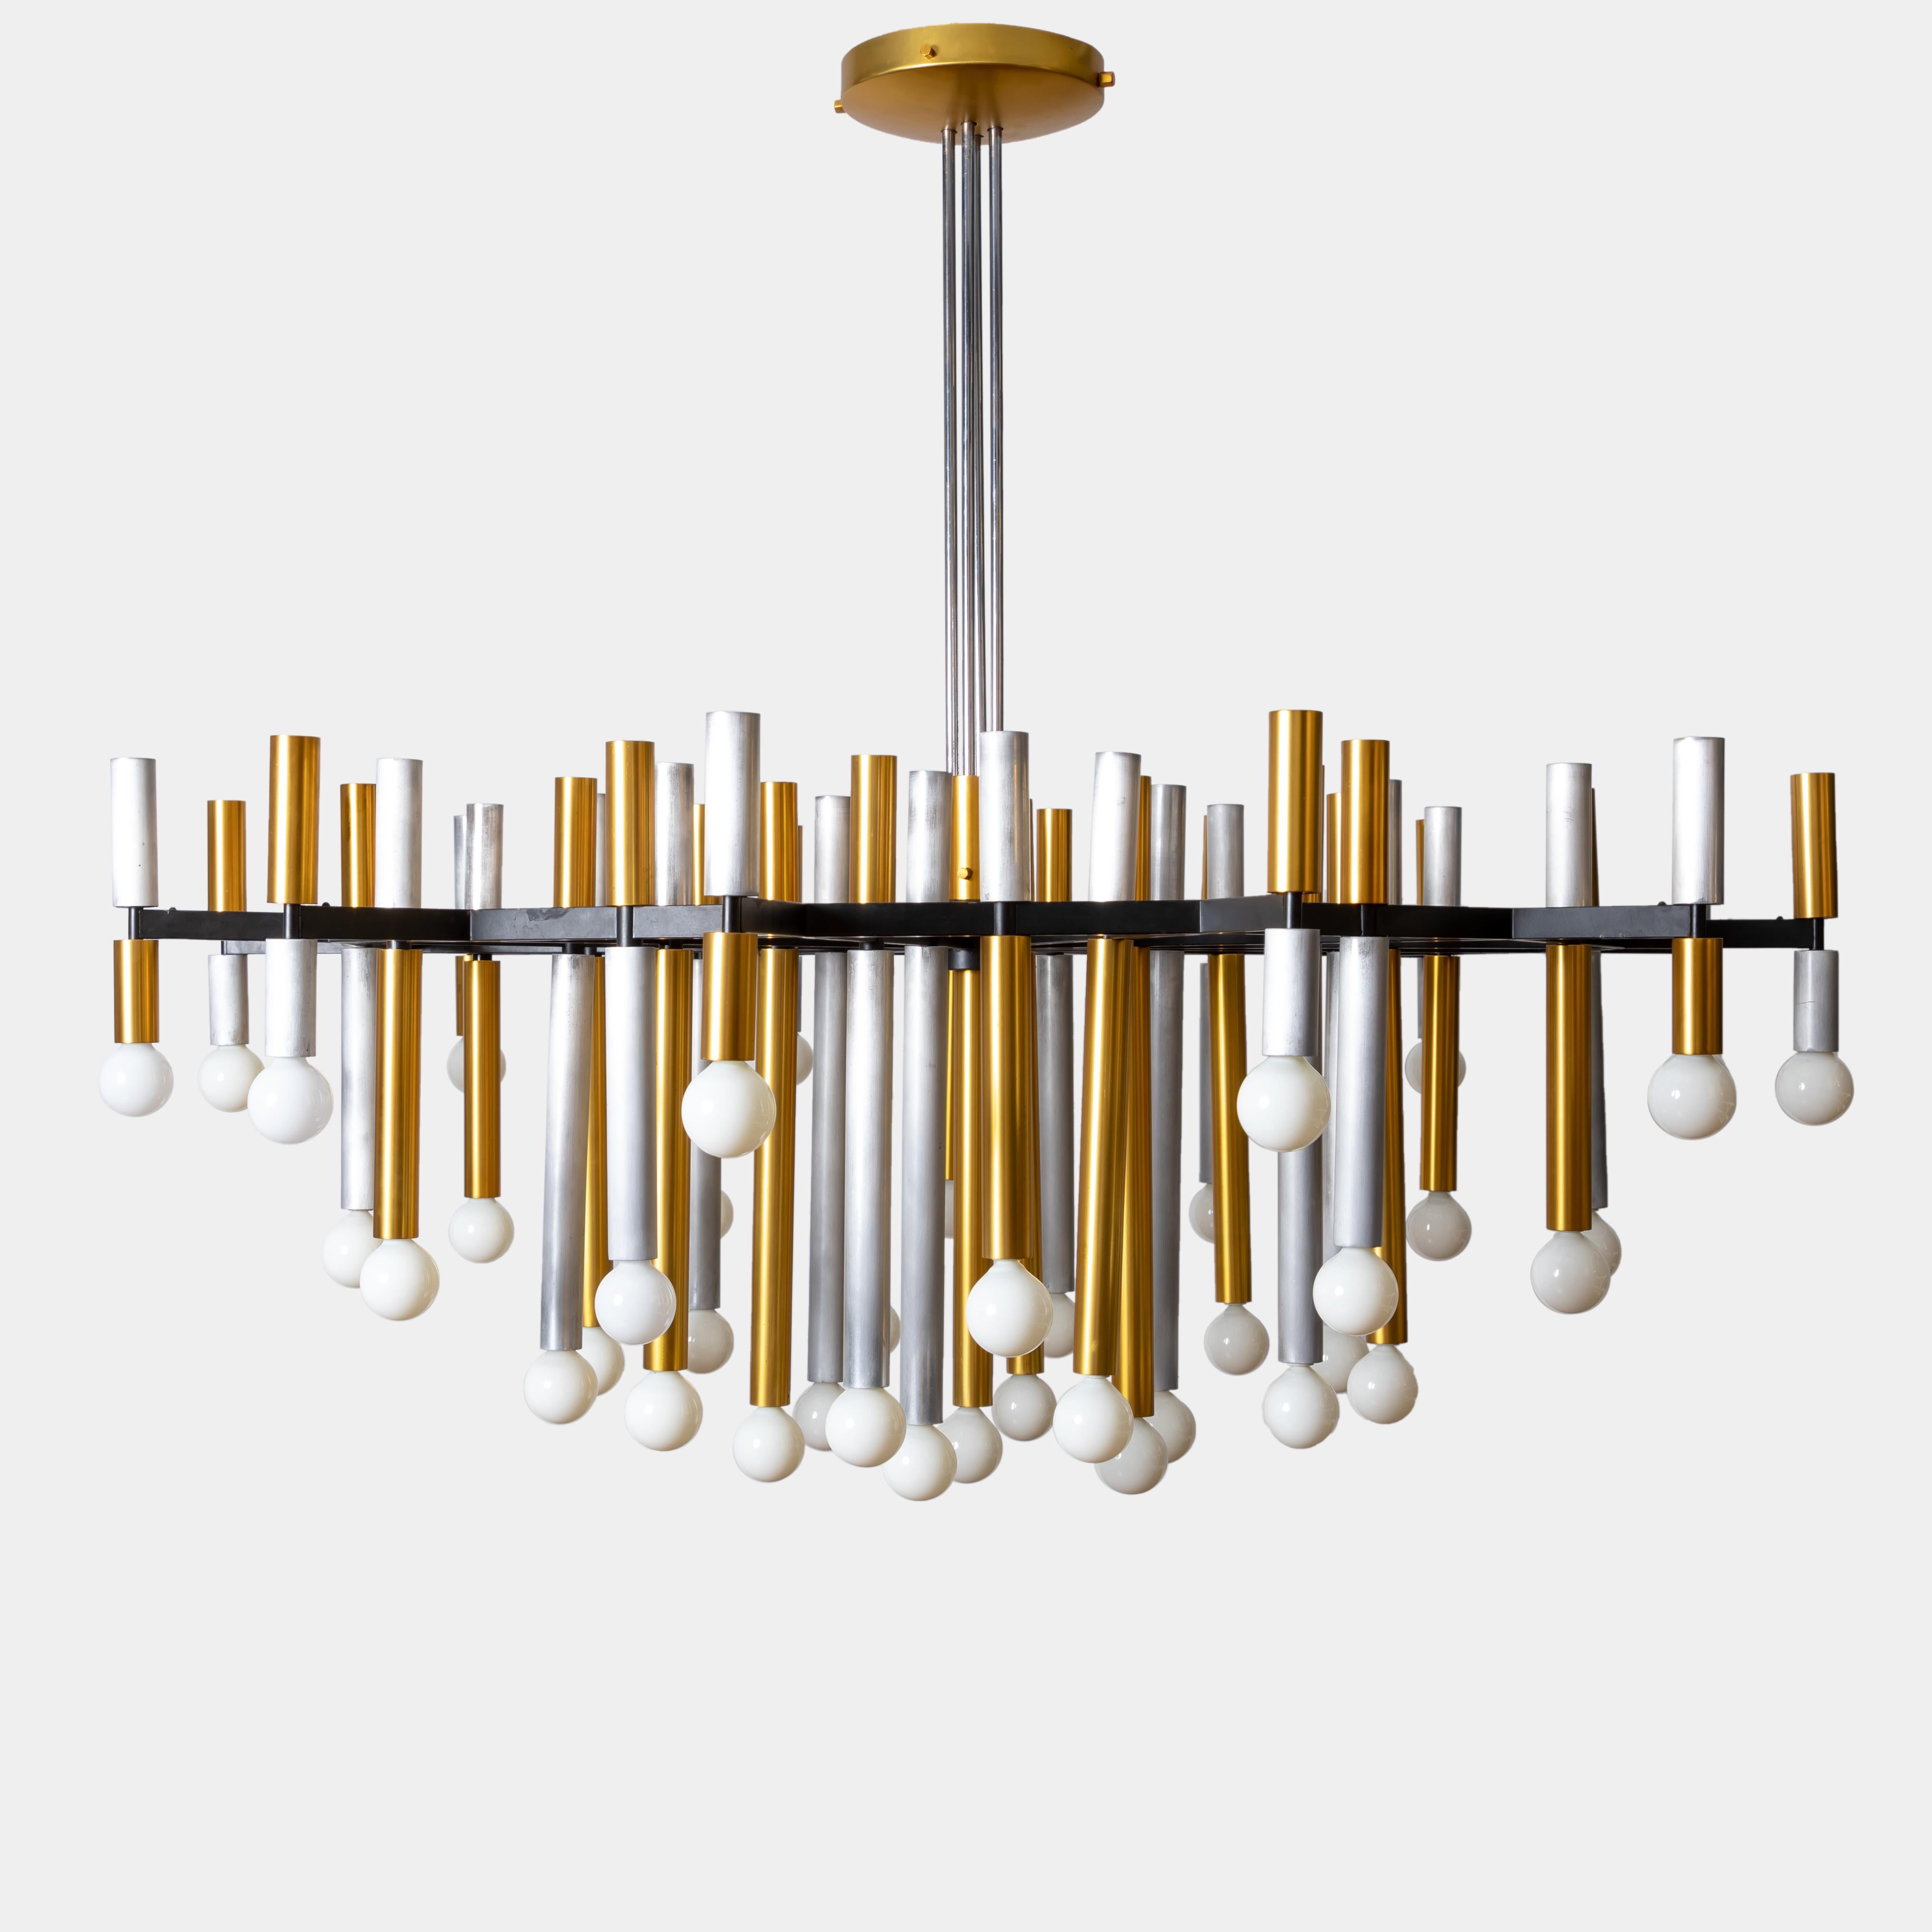 Important large 43-light Stilnovo chandelier, model 1155/43, with alternating brass and aluminum tubular arms suspended from black enameled aluminum structure, Italy, circa 1955. There are two tiers of brass and aluminum tubes separated by the